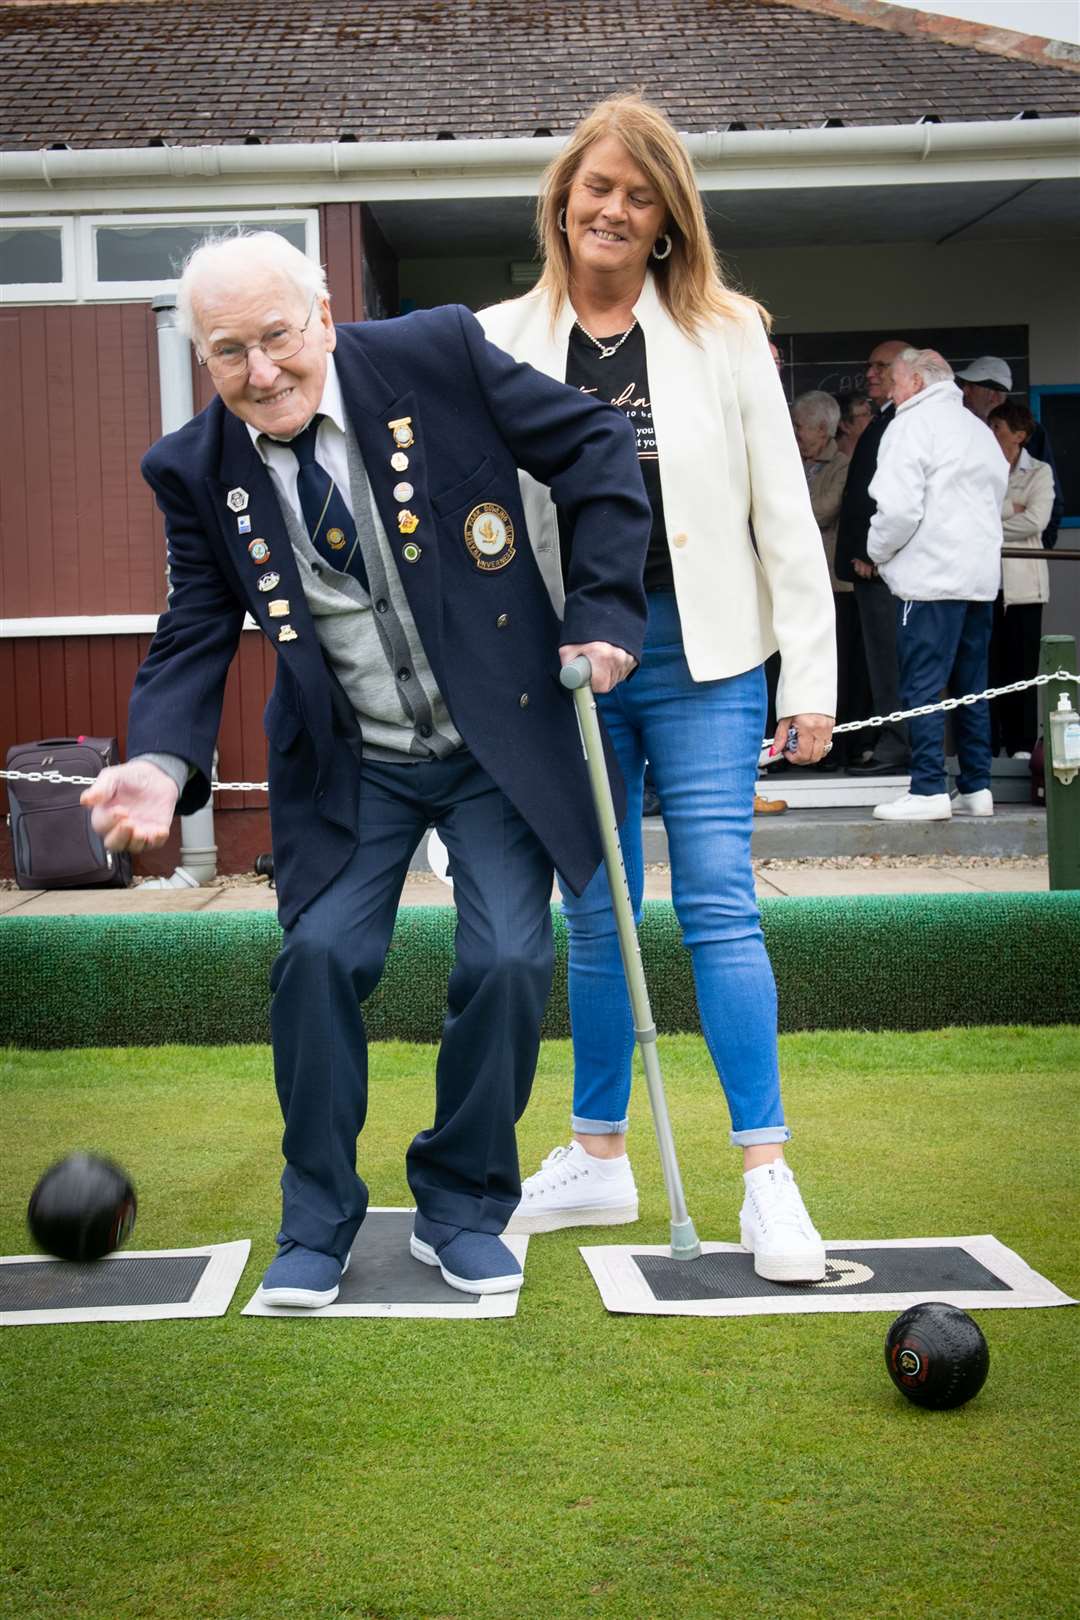 Alan Mair was given the honour to throw the first bowl assisted by his daughter in law Susan Mair. Picture: Callum Mackay